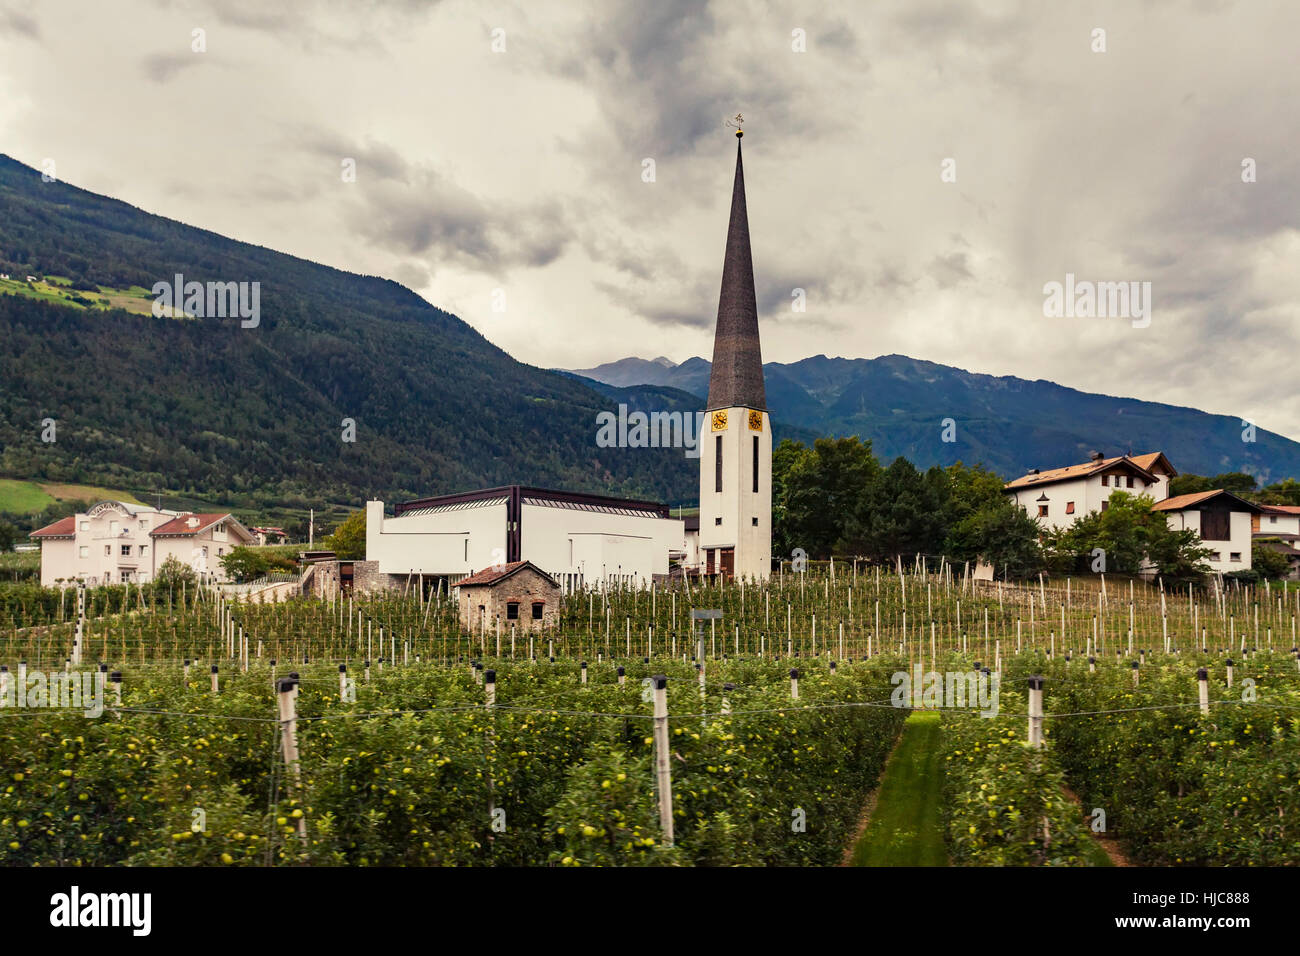 Church and orchards in Vinschgau Valley, South Tyrol, Italy Stock Photo